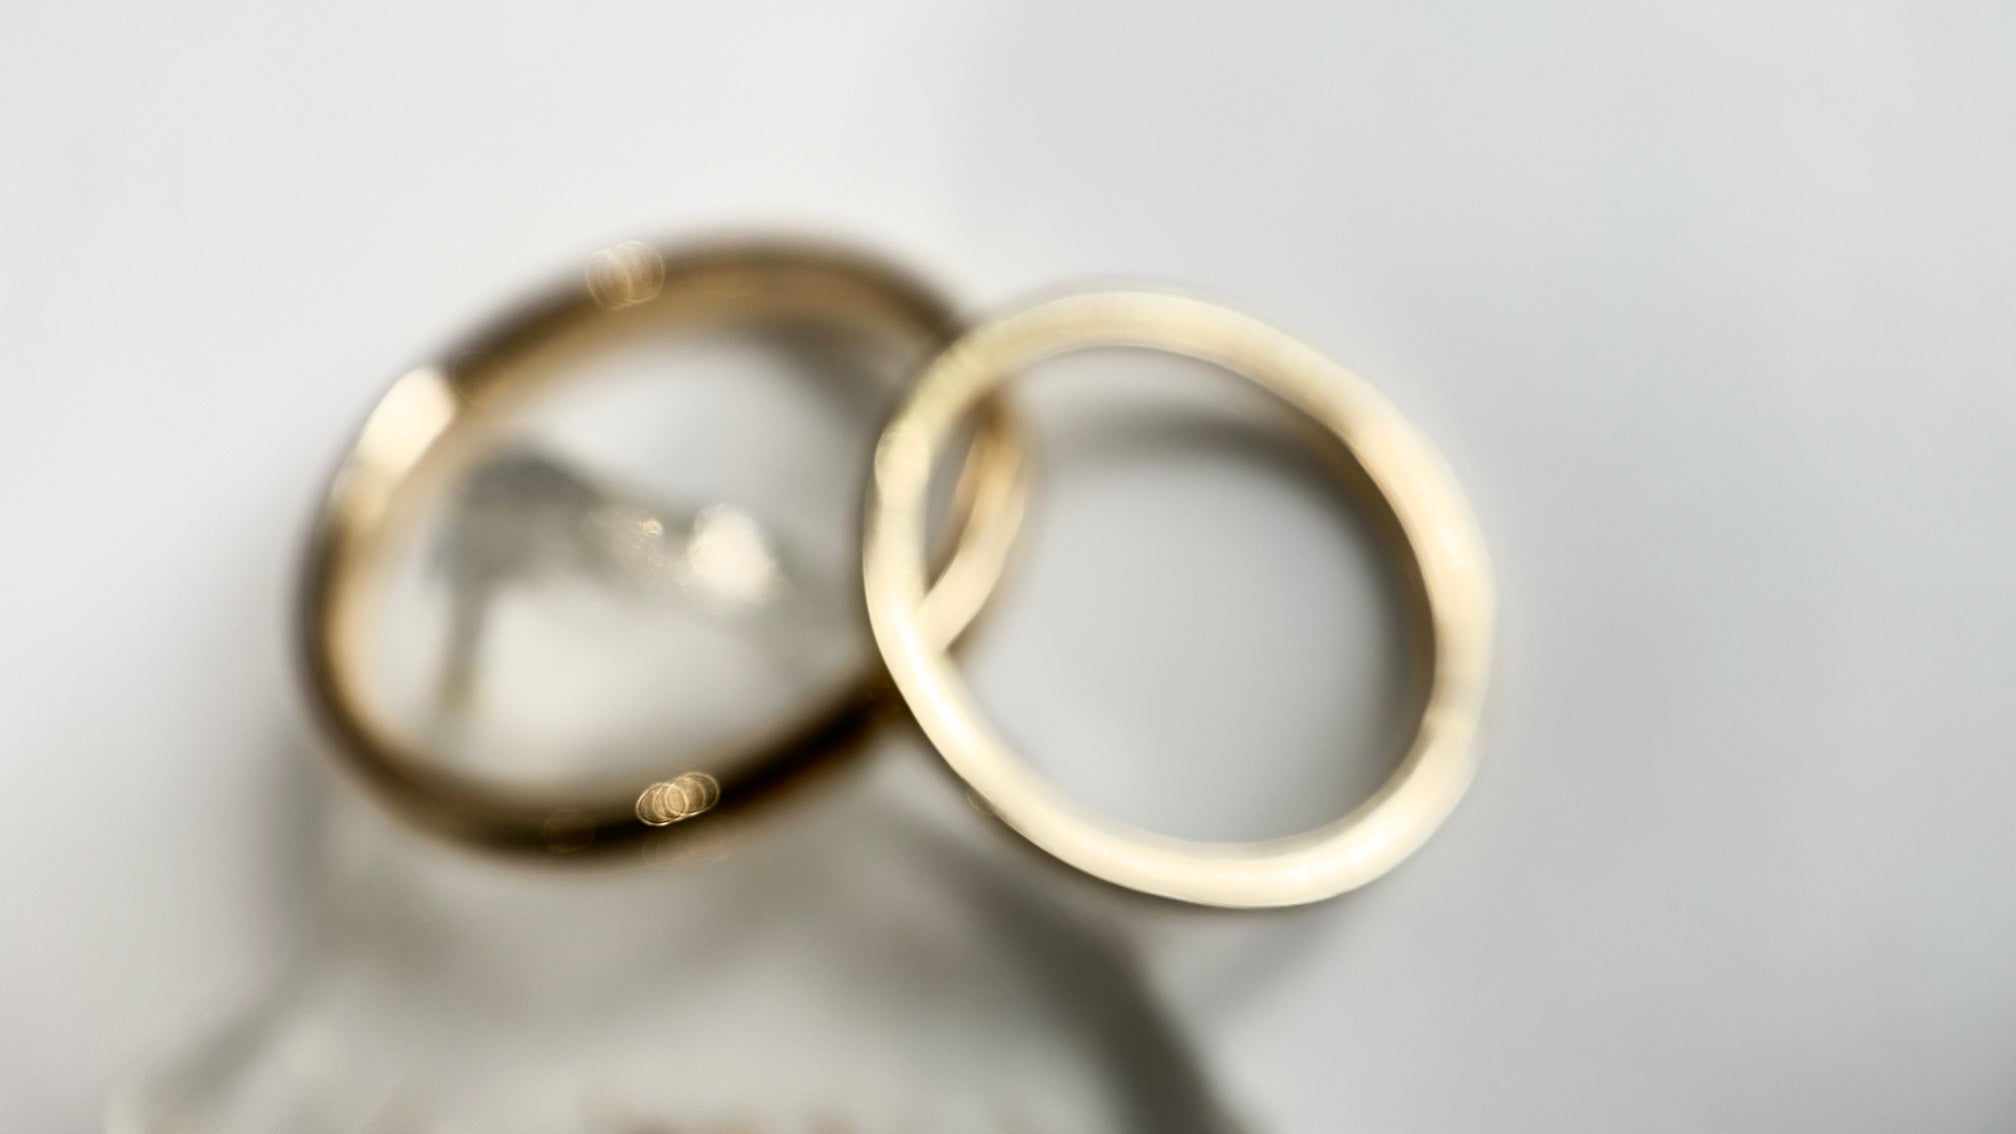 2 yellow gold wedding rings out of focus on white background